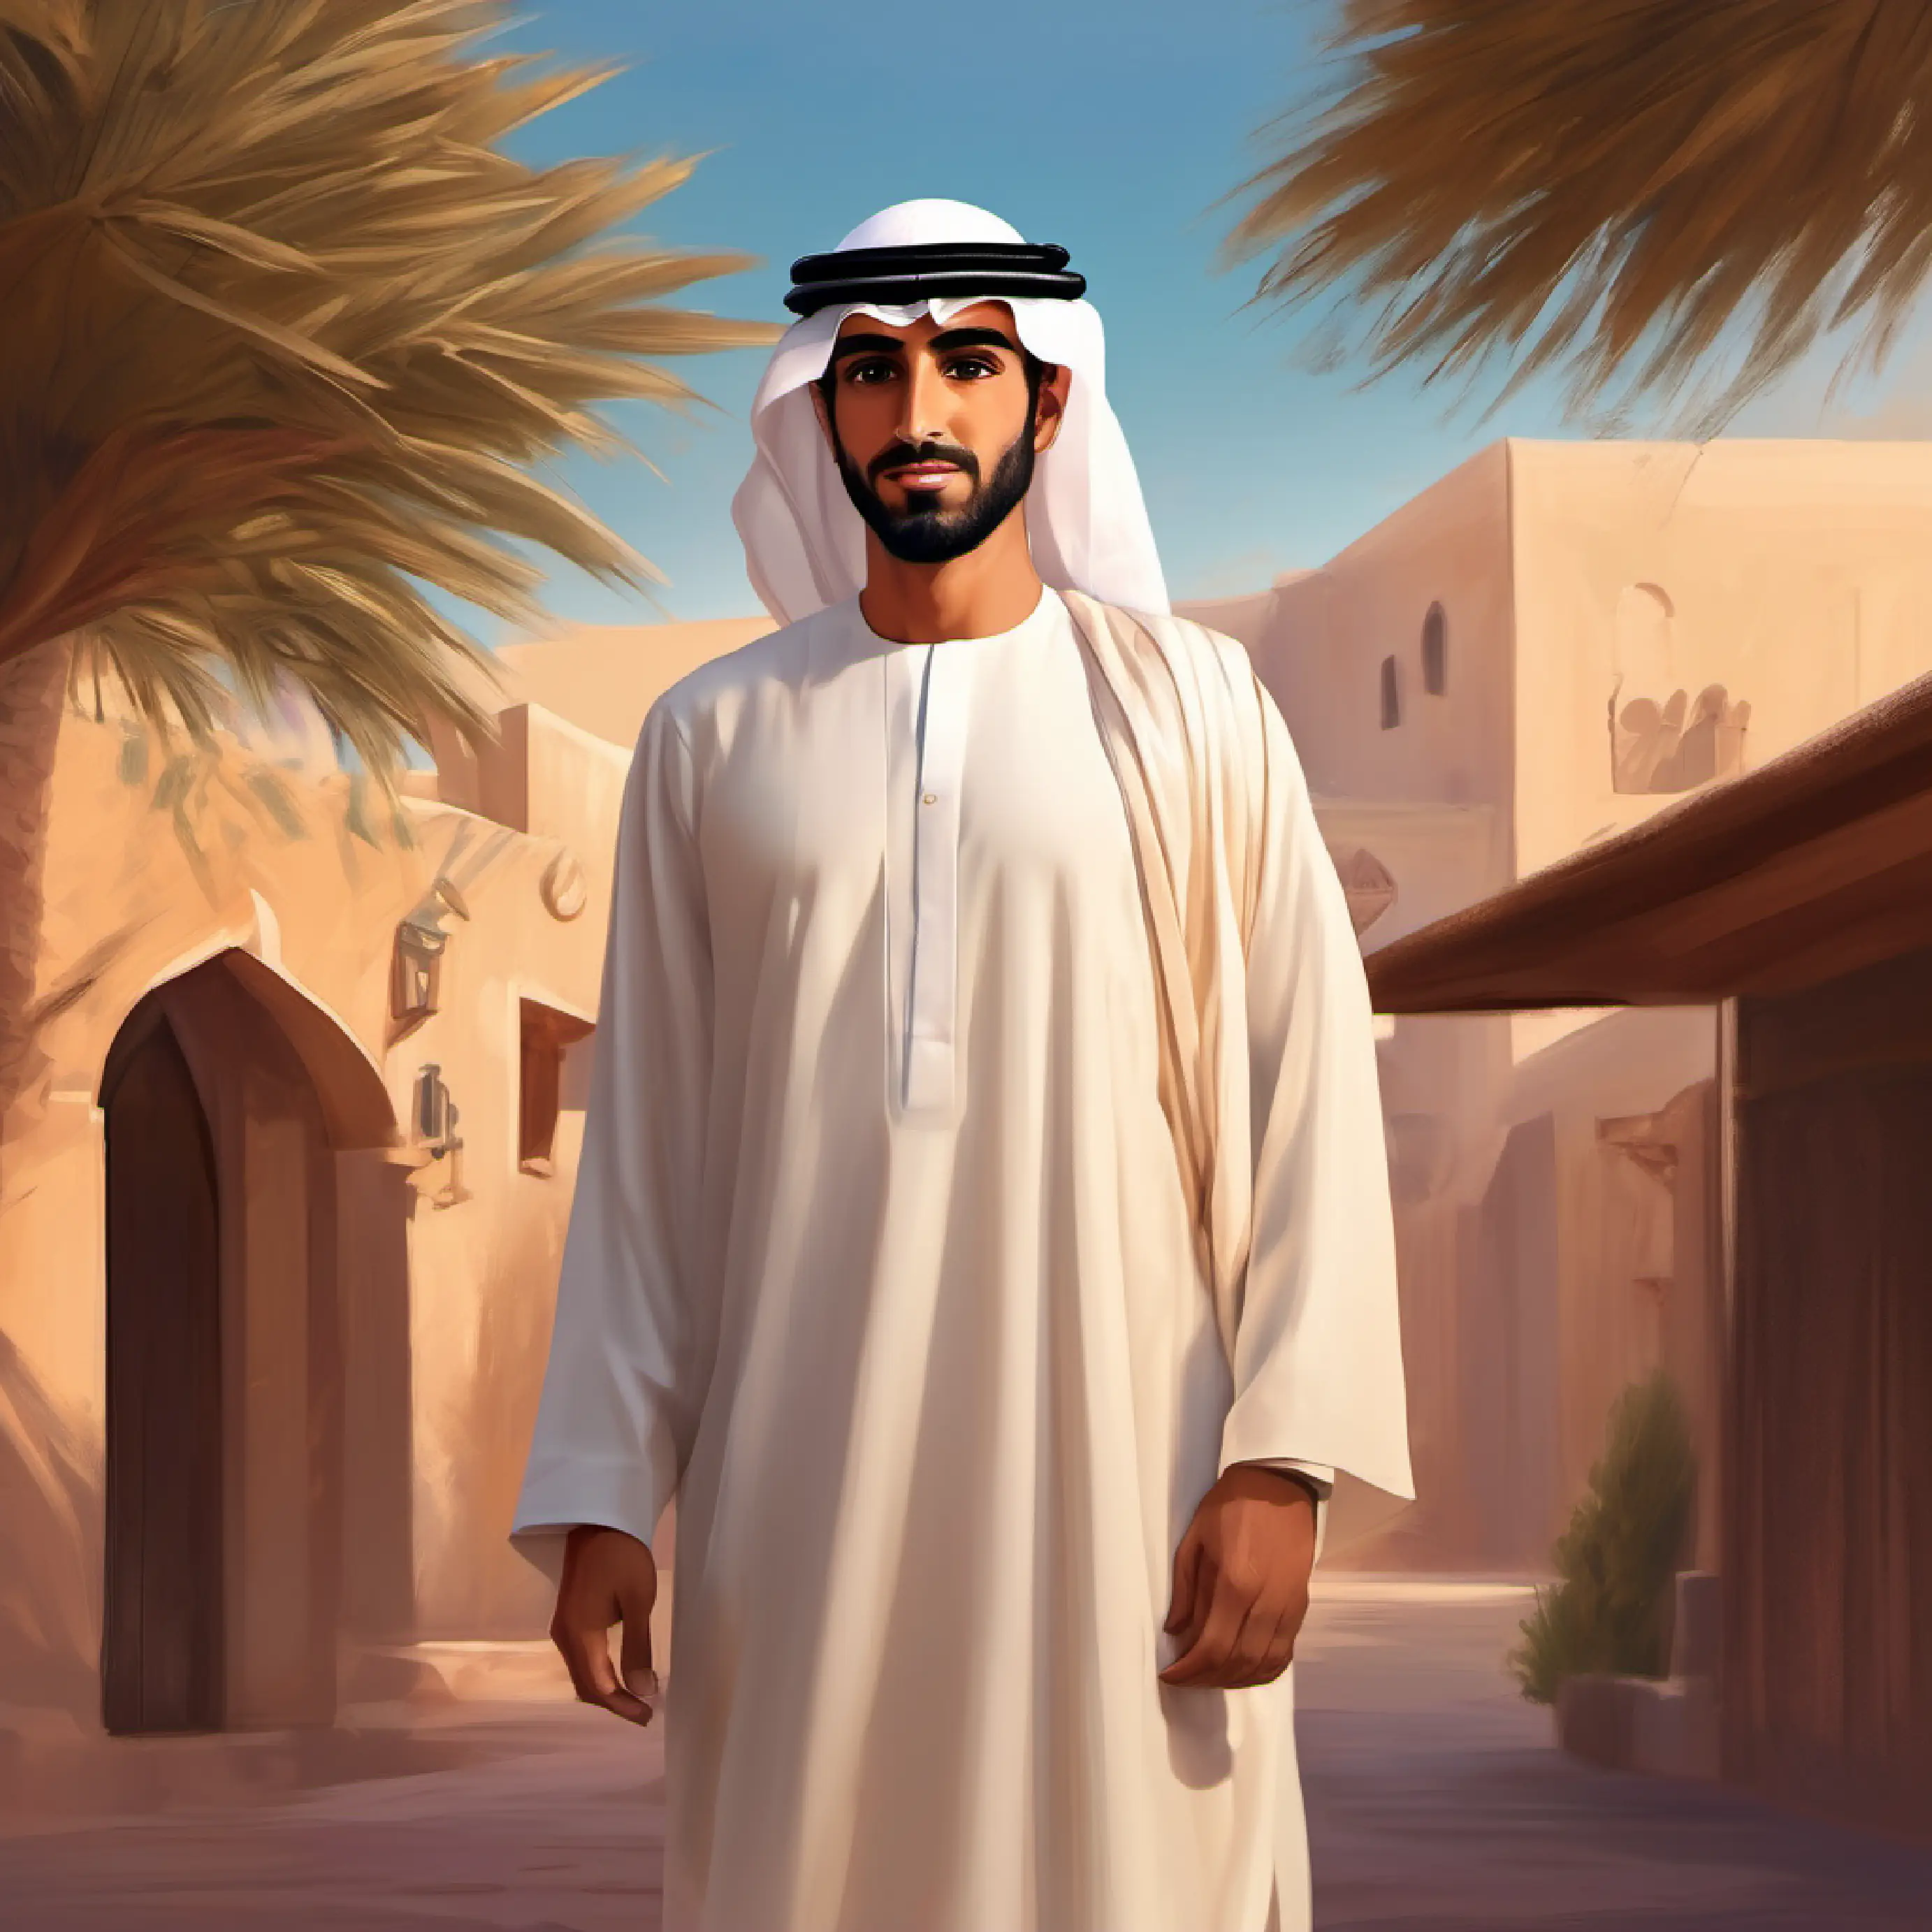 Young Emirati man, bronze skin, earnest dark eyes, with a scientific gaze's mixed feelings about his homecoming.